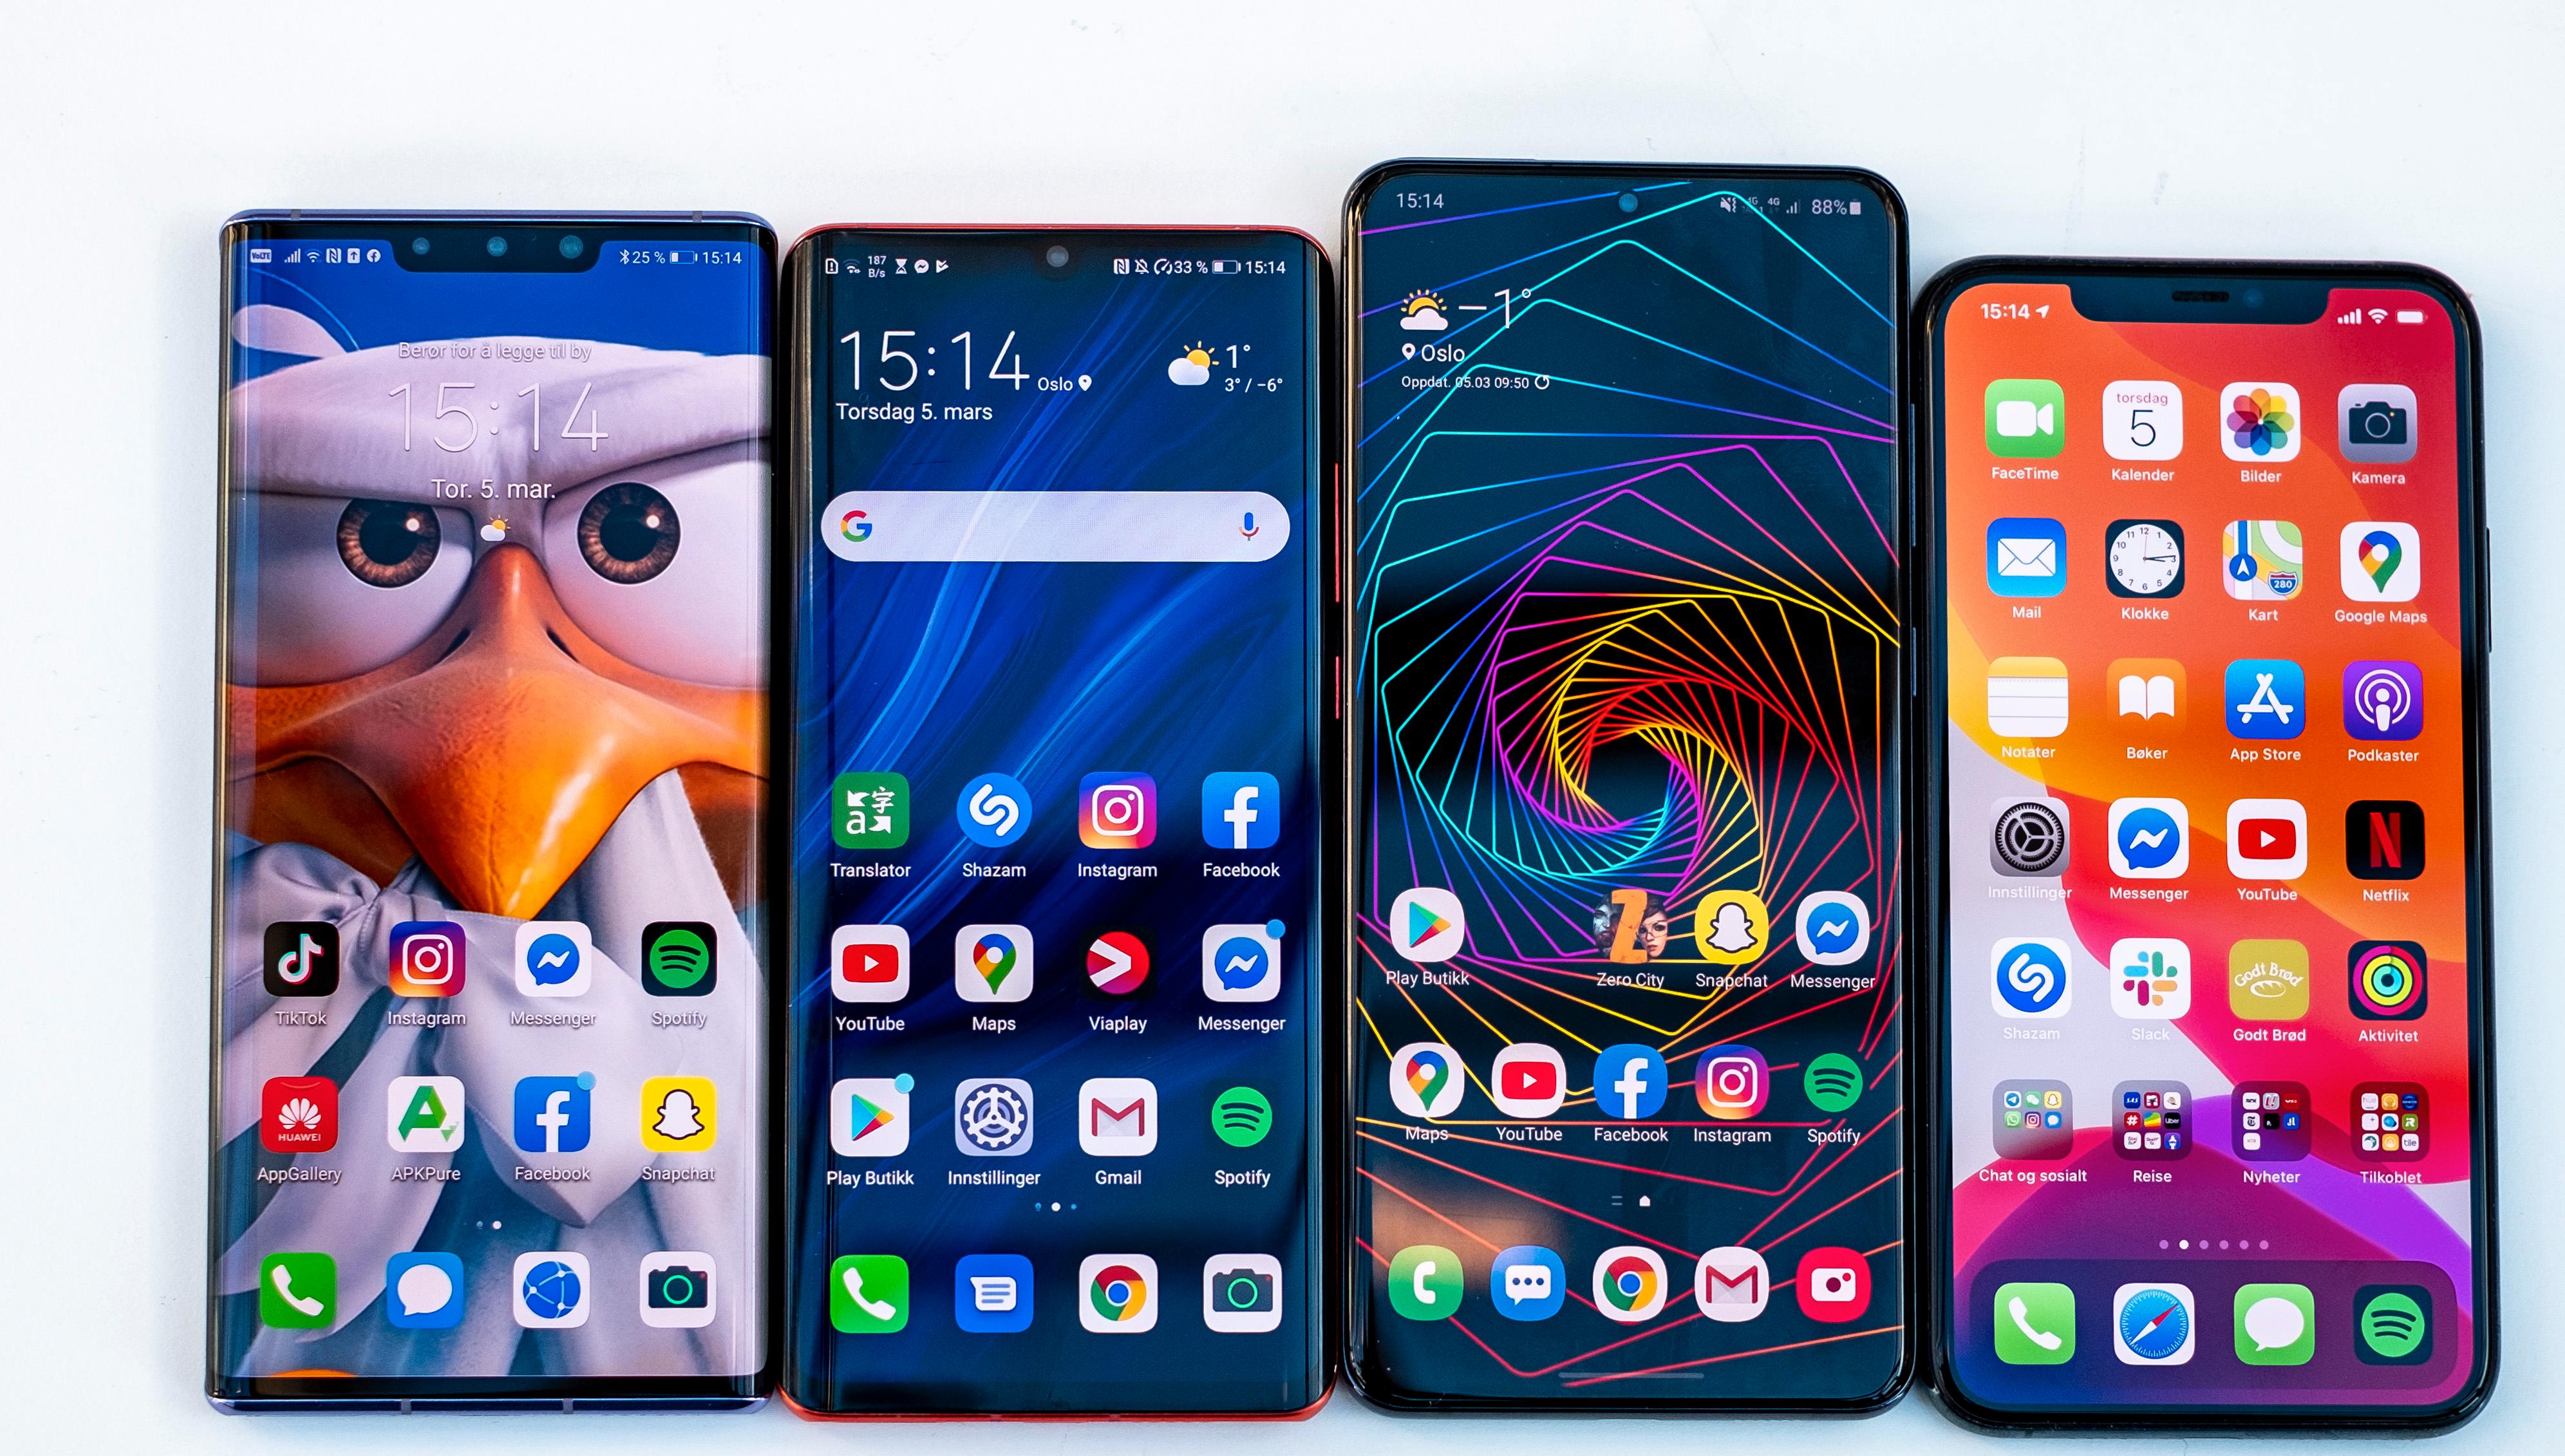 Fra venstre: Huawei Mate 30 Pro, Huawei P30 Pro, Samsung Galaxy S20 Ultra, Apple iPhone 11 Pro Max